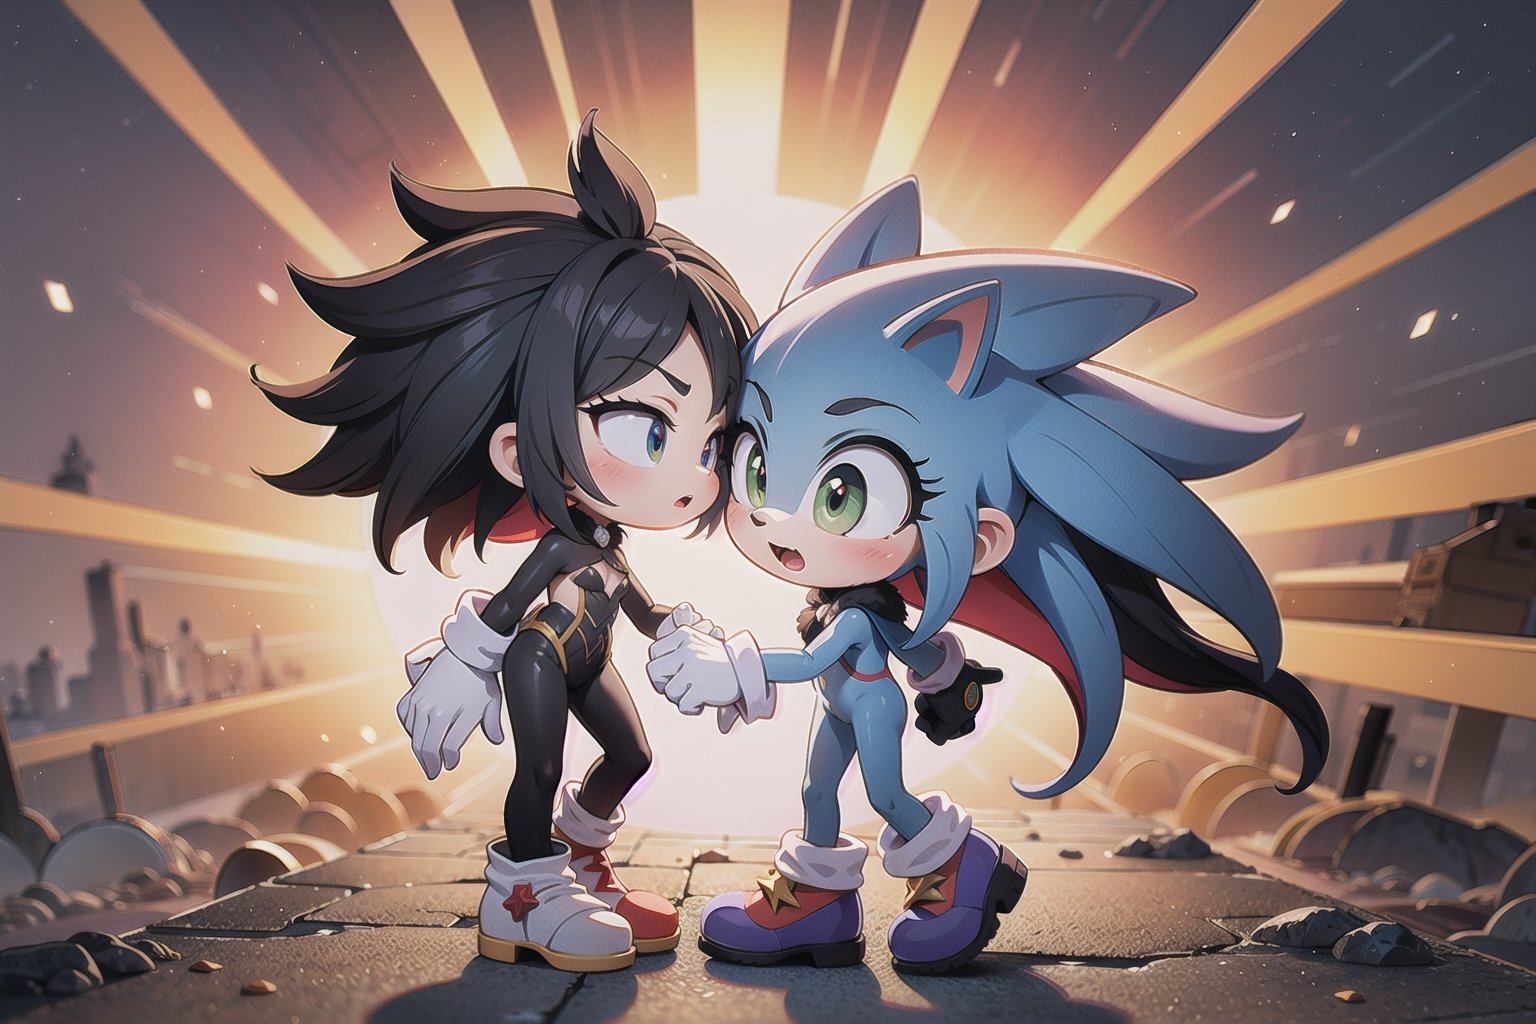 Against the warm glow of Looney's sun-kissed orange sky, Monadef and Sonic the Hedgehog stand united, silhouetted against the vibrant backdrop. Sonic's bright blue spikes and fiery red shoes pop against weathered gray stone, radiating kinetic energy. Rendered in breathtaking 32K UHD, their forms seem ready to leap into action, as if stepping out of the composition.